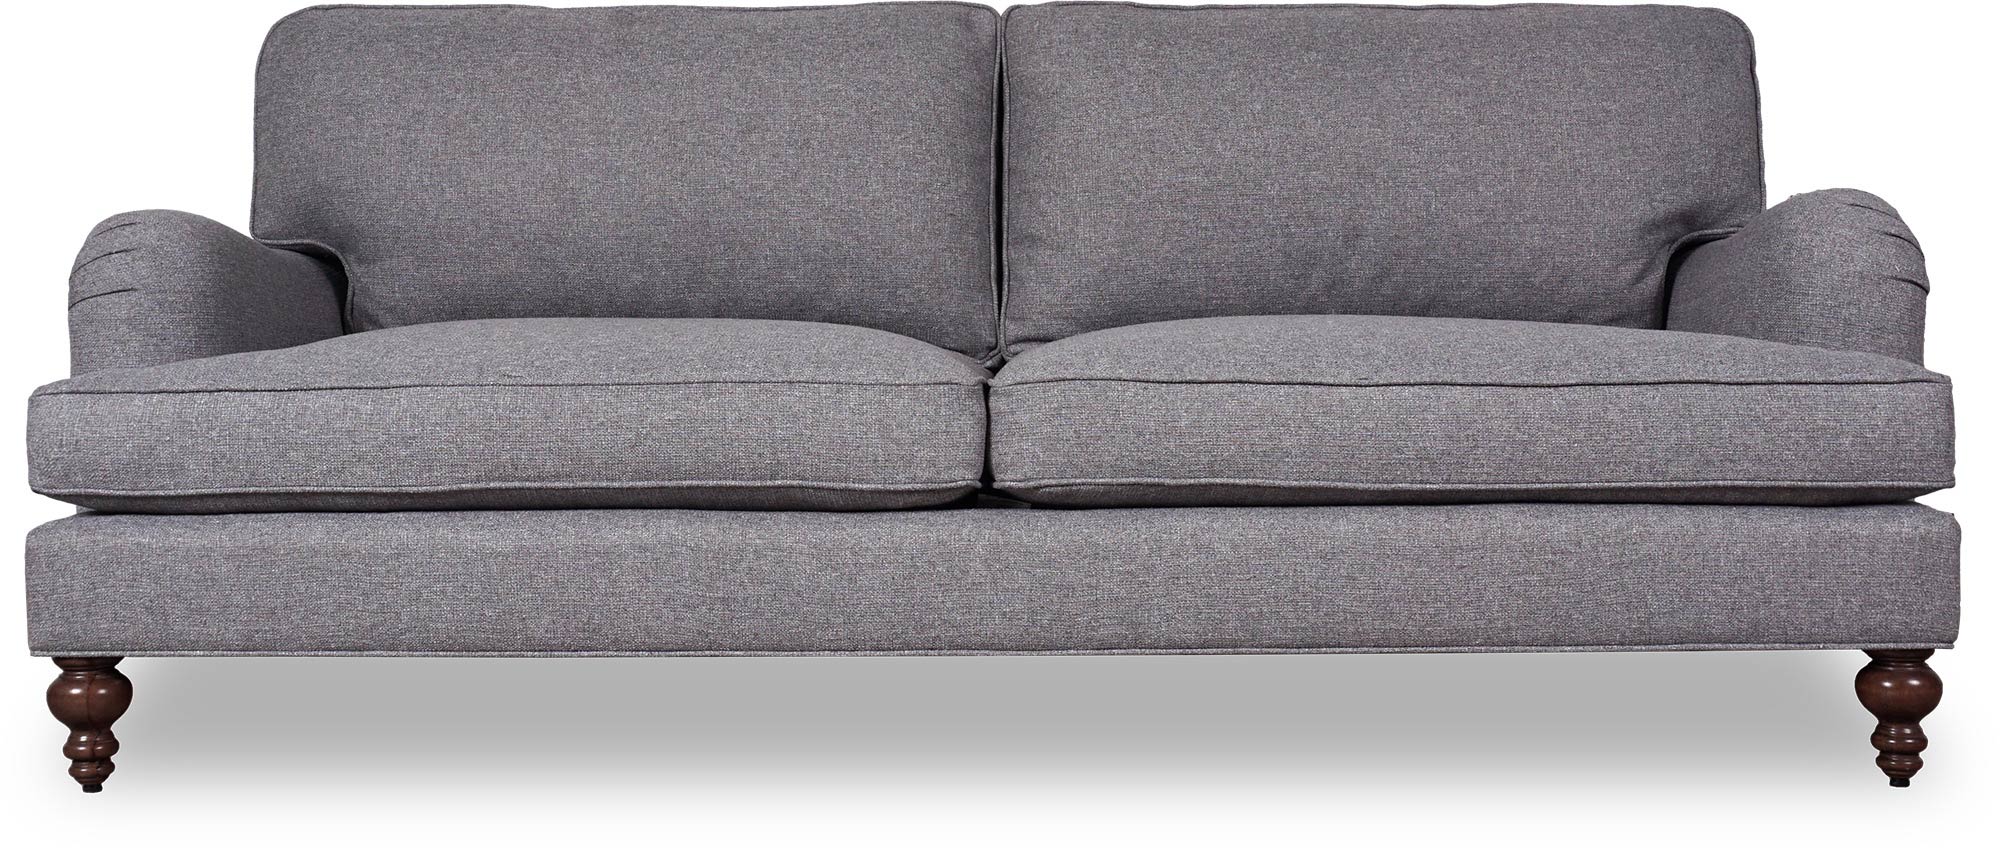 86 Blythe pillow back English roll arm sofa in Ludlow Steel stain-proof grey fabric